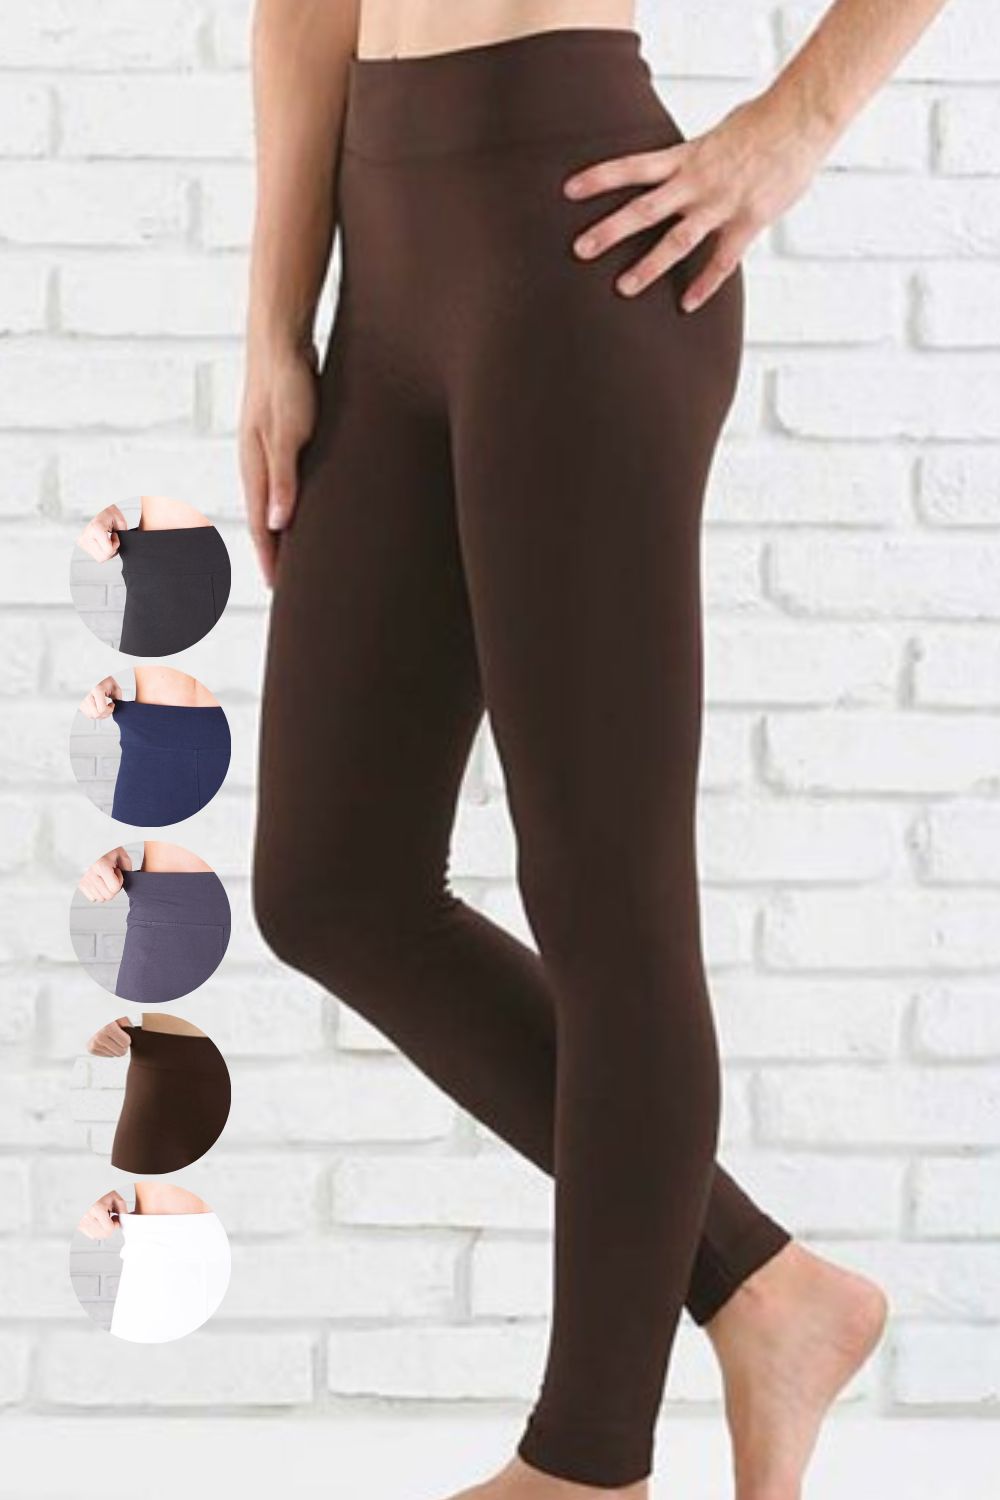 Womens Solid Leggings 3" comfort stretch yoga waistband full length stretch recovery tummy control buttery soft brushed material available in 5 colors: black, navy blue, charcoal grey, coffee brown, white